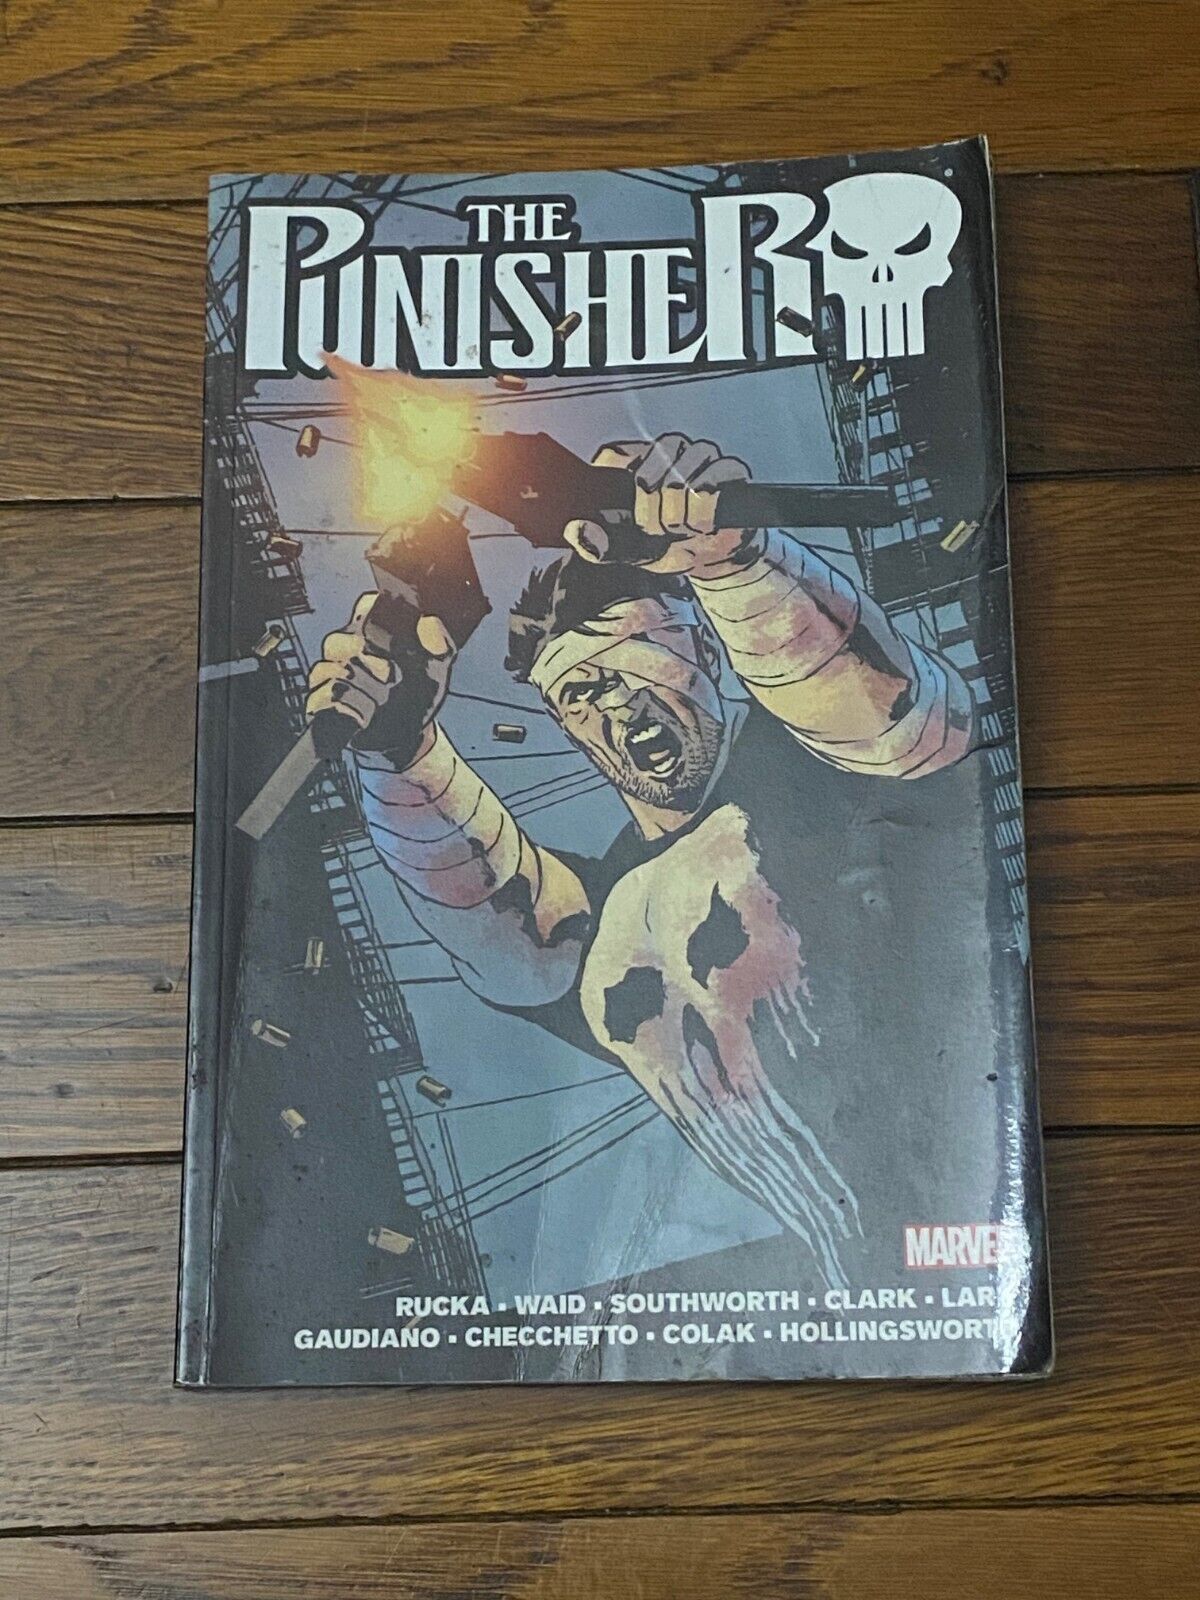 The Punisher Vol 2 by Greg Rucka TPB Graphic Novel